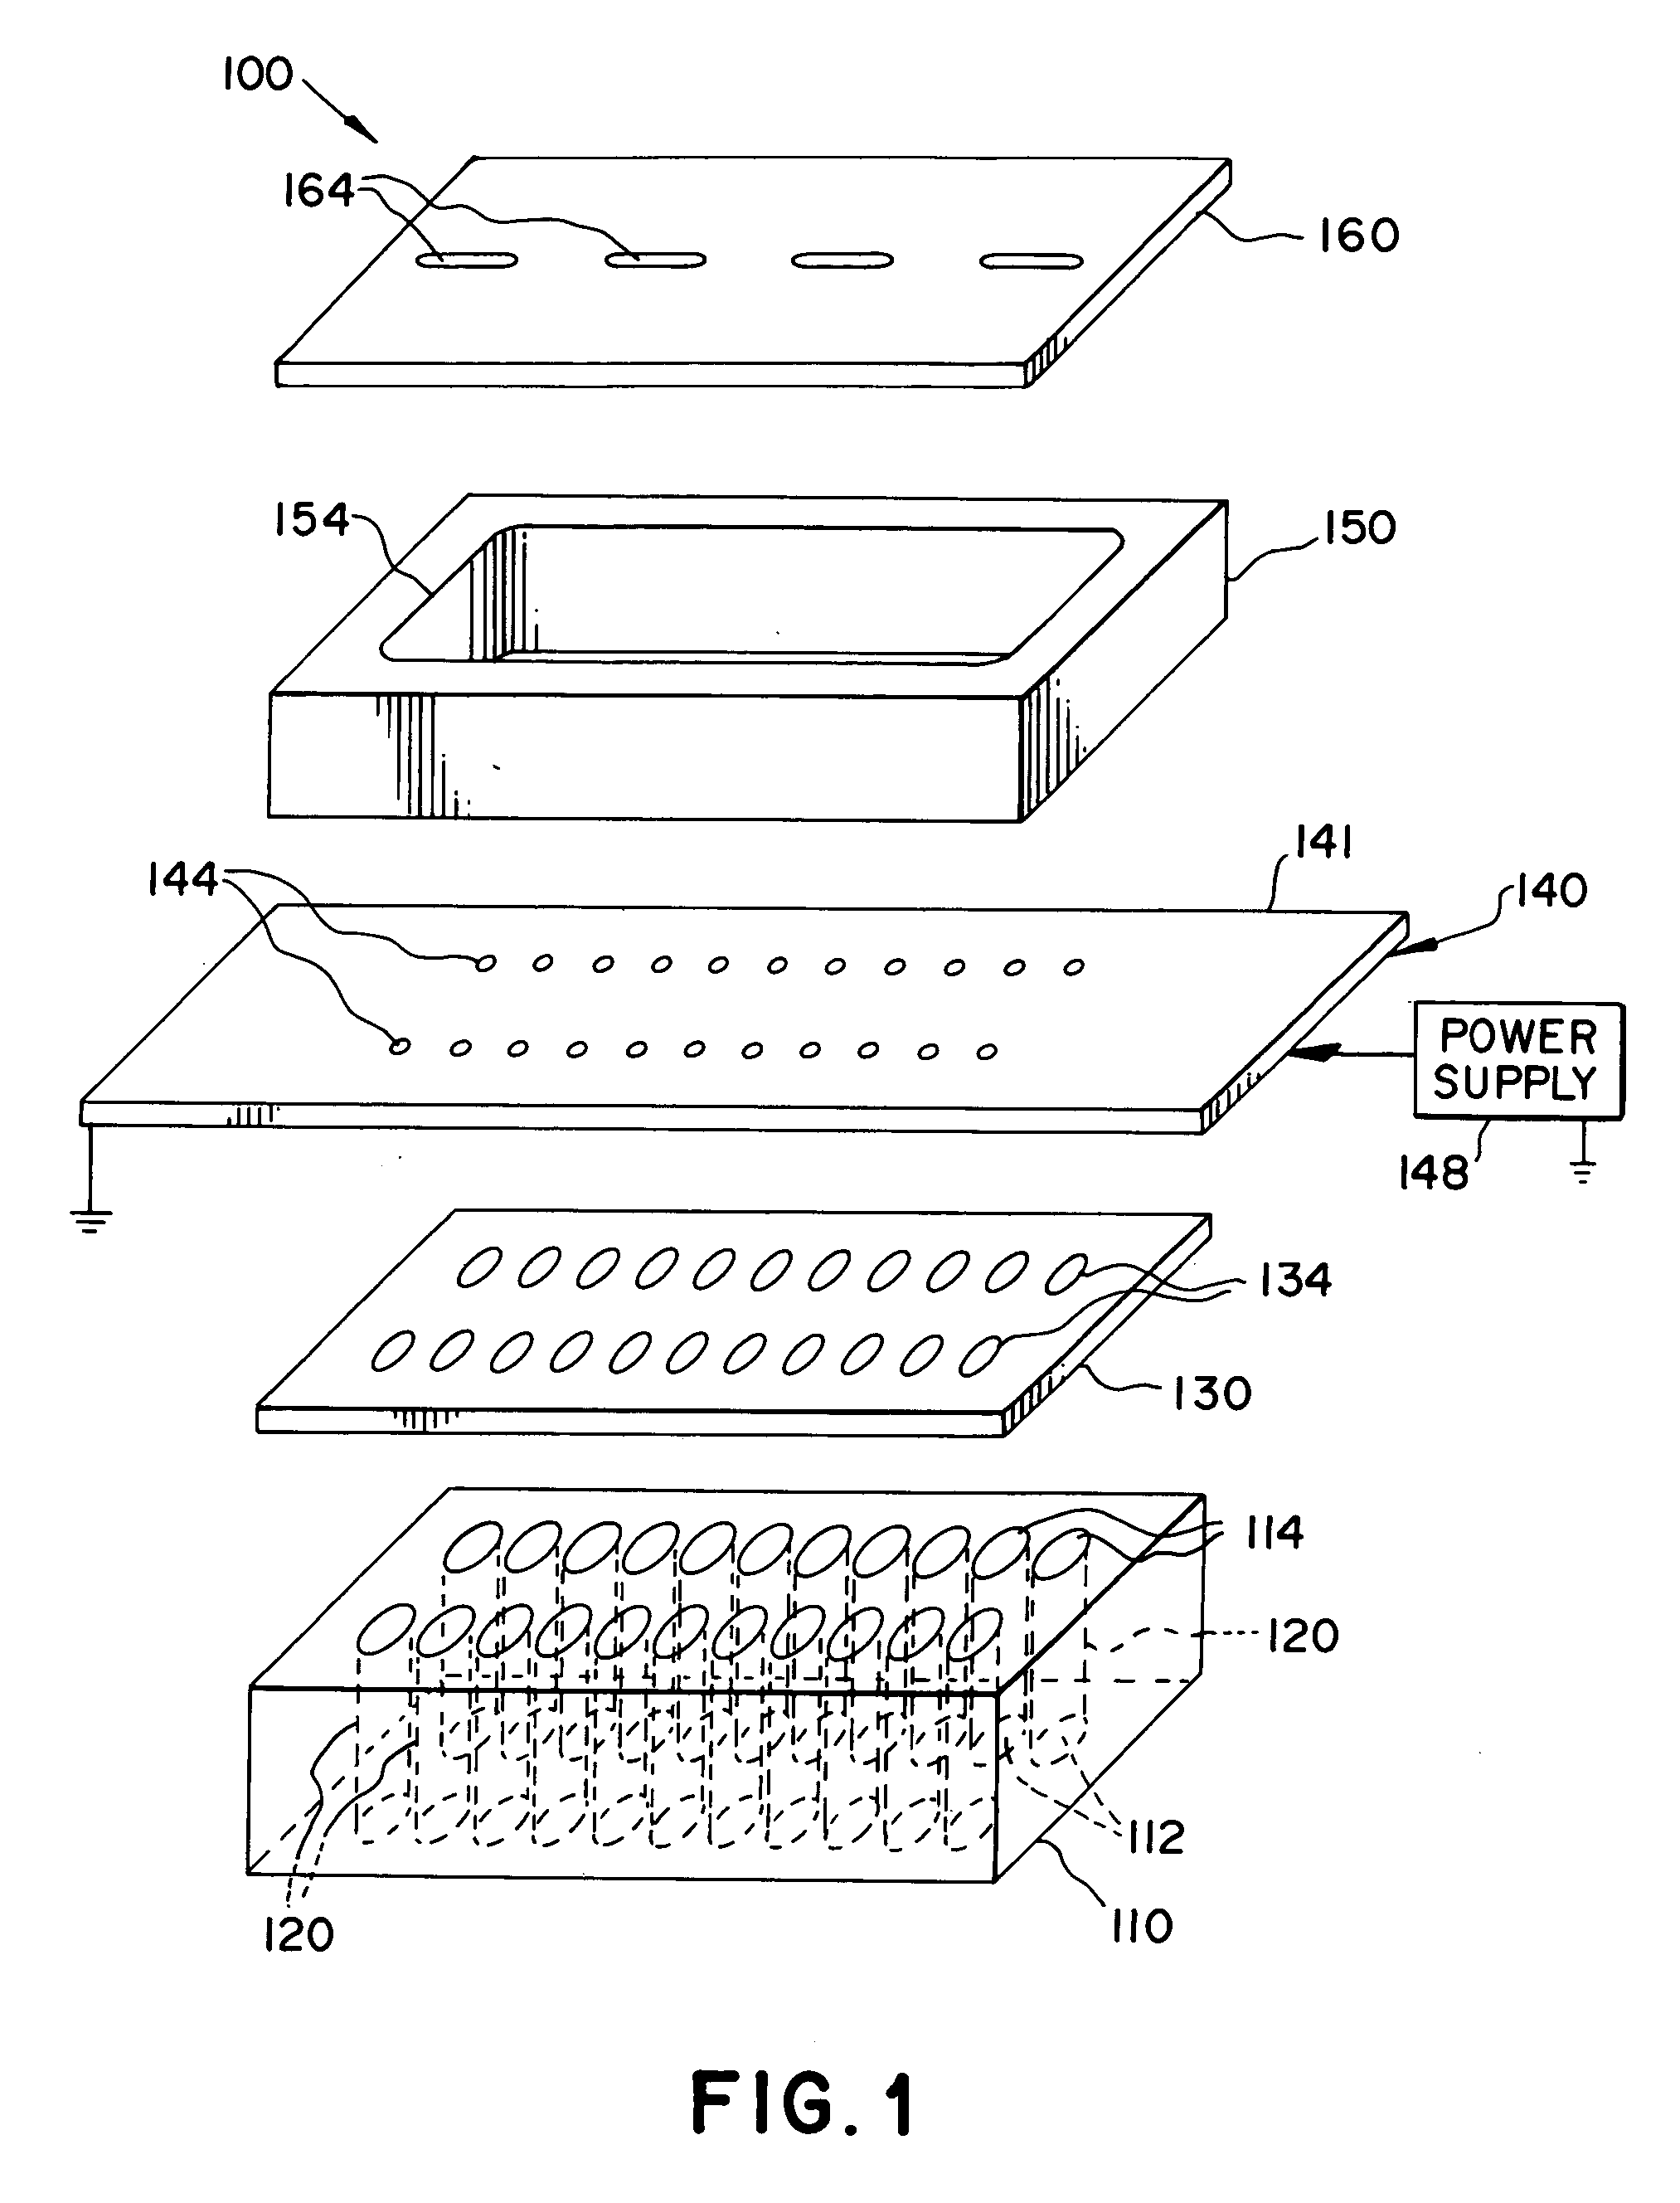 Thermal physical vapor deposition source using pellets of organic material for making OLED displays